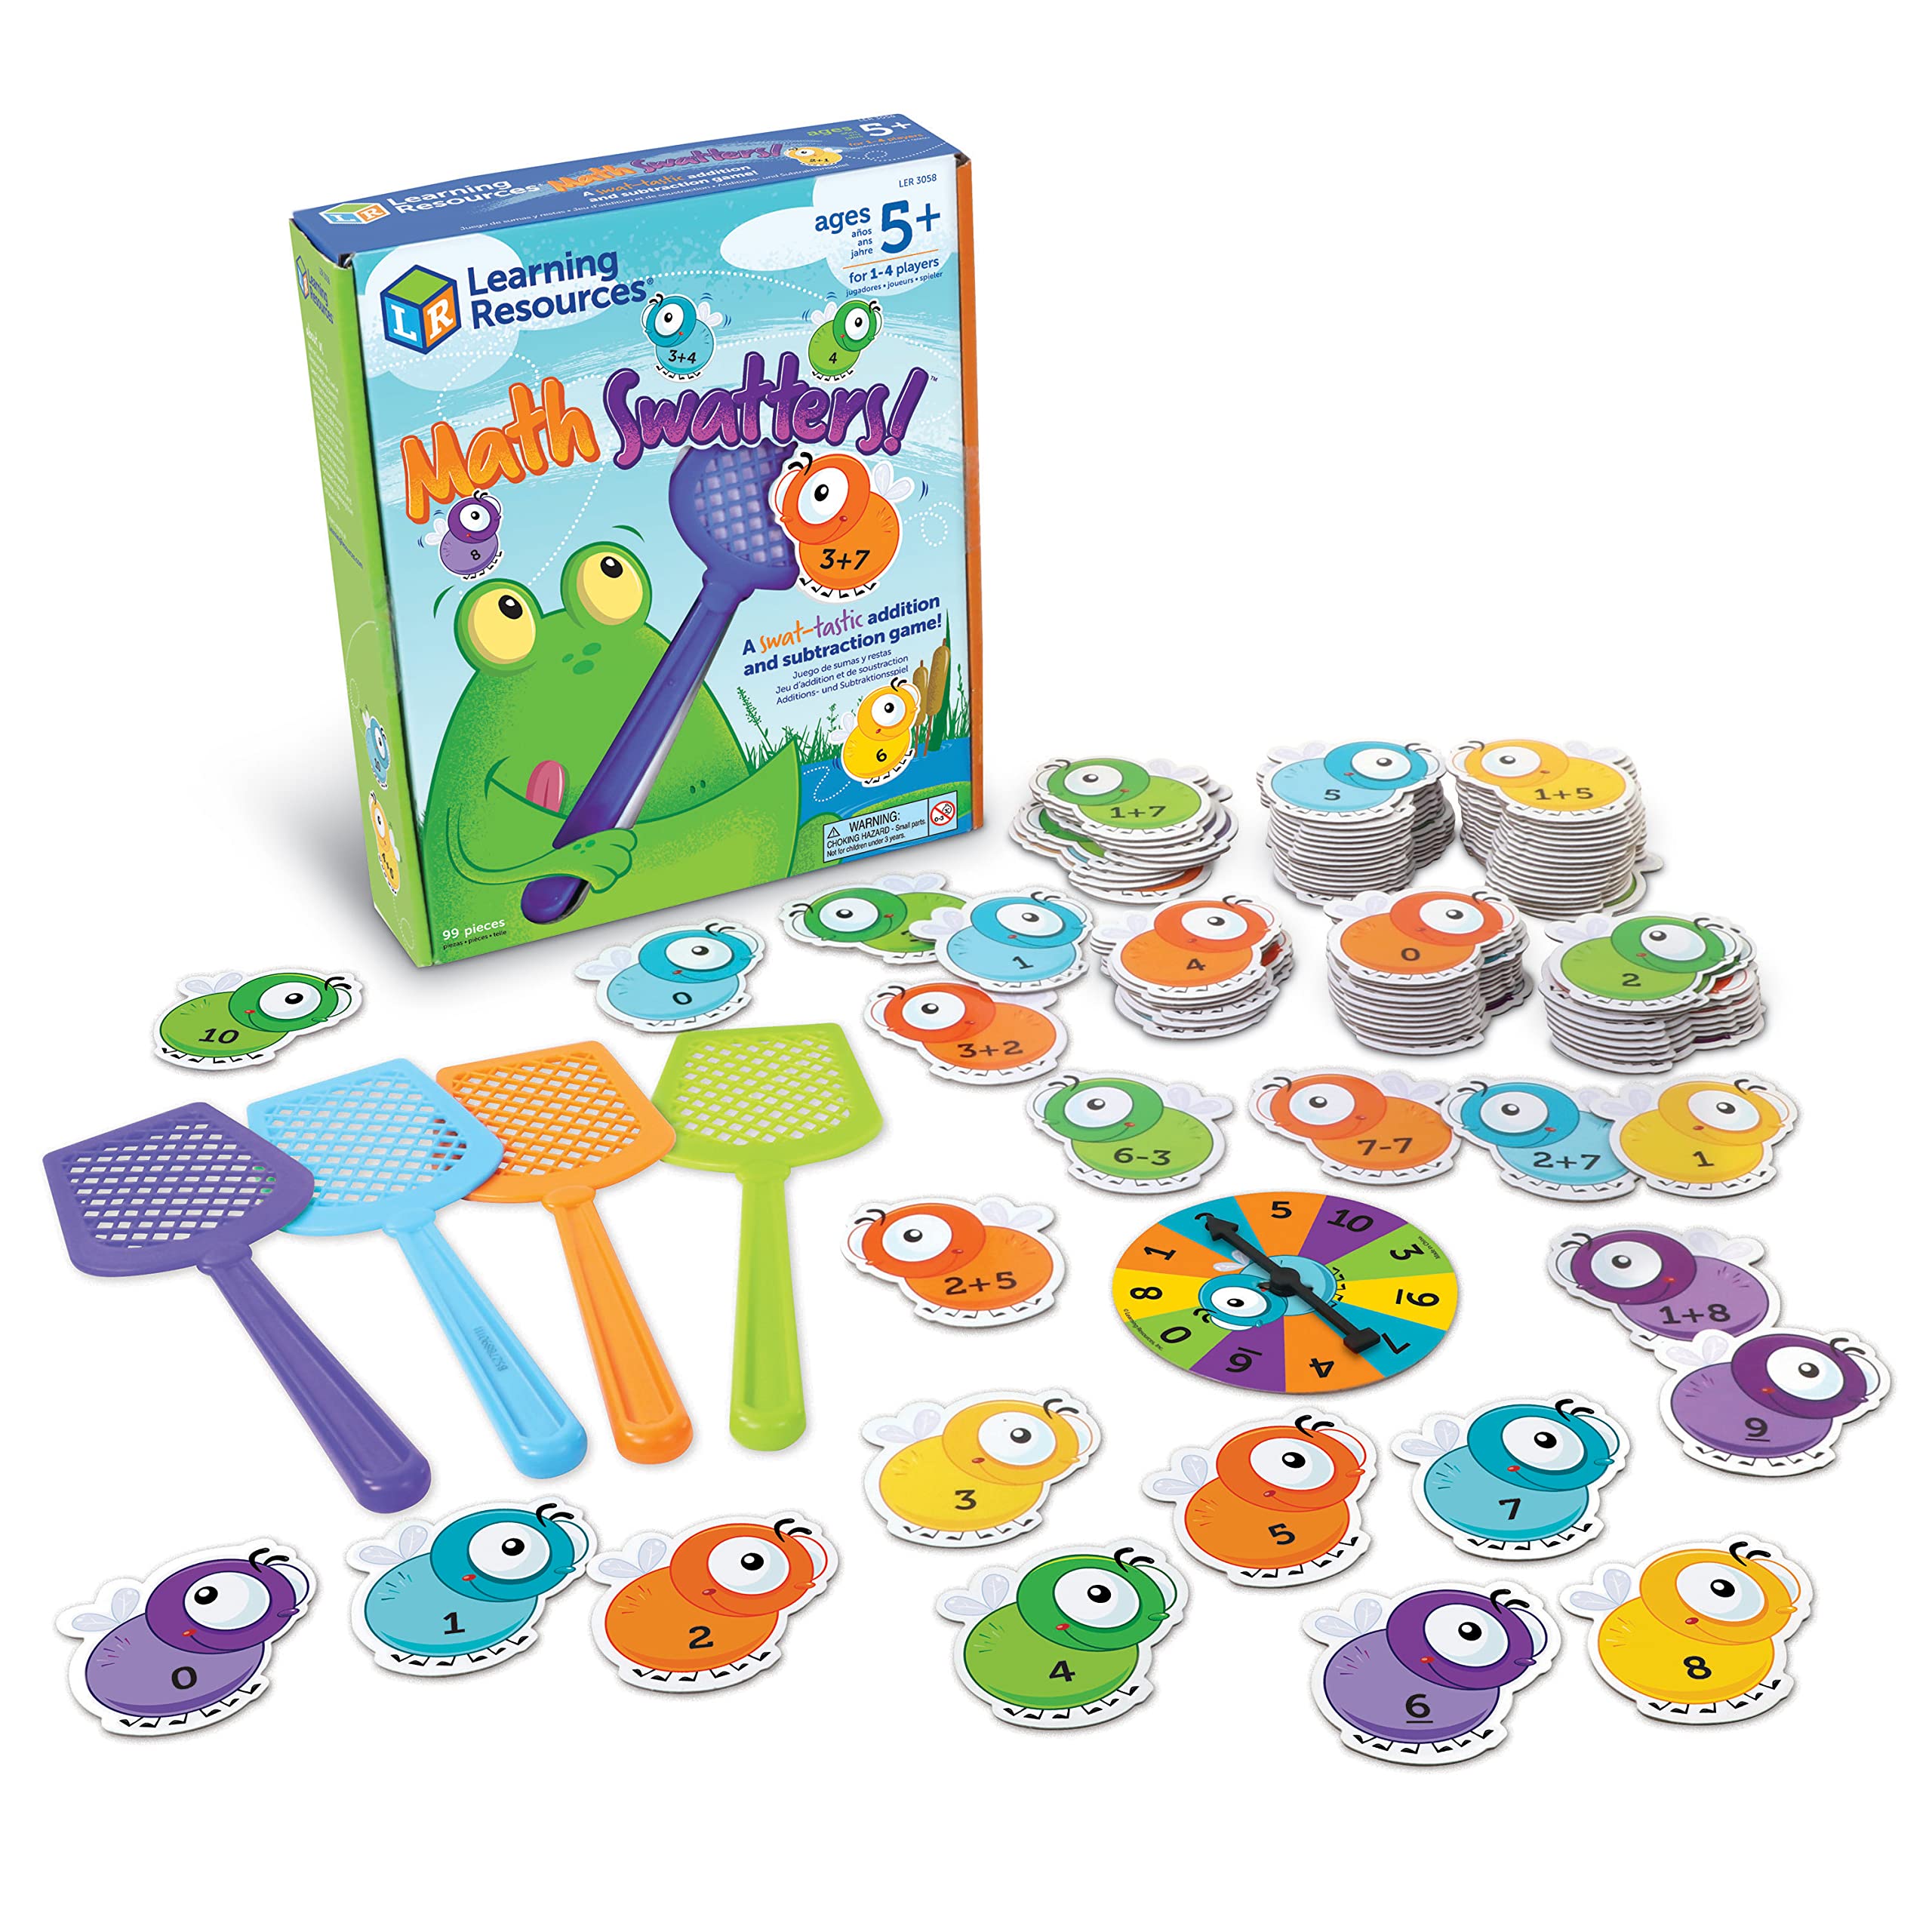 Learning Resources Mathswatters Addition & Subtraction Game - 99 Pieces, Age 5+ Math Games for Kids, Educational Games, Preschool Math, Kindergartner Learning Games Gifts for Boys and Girls